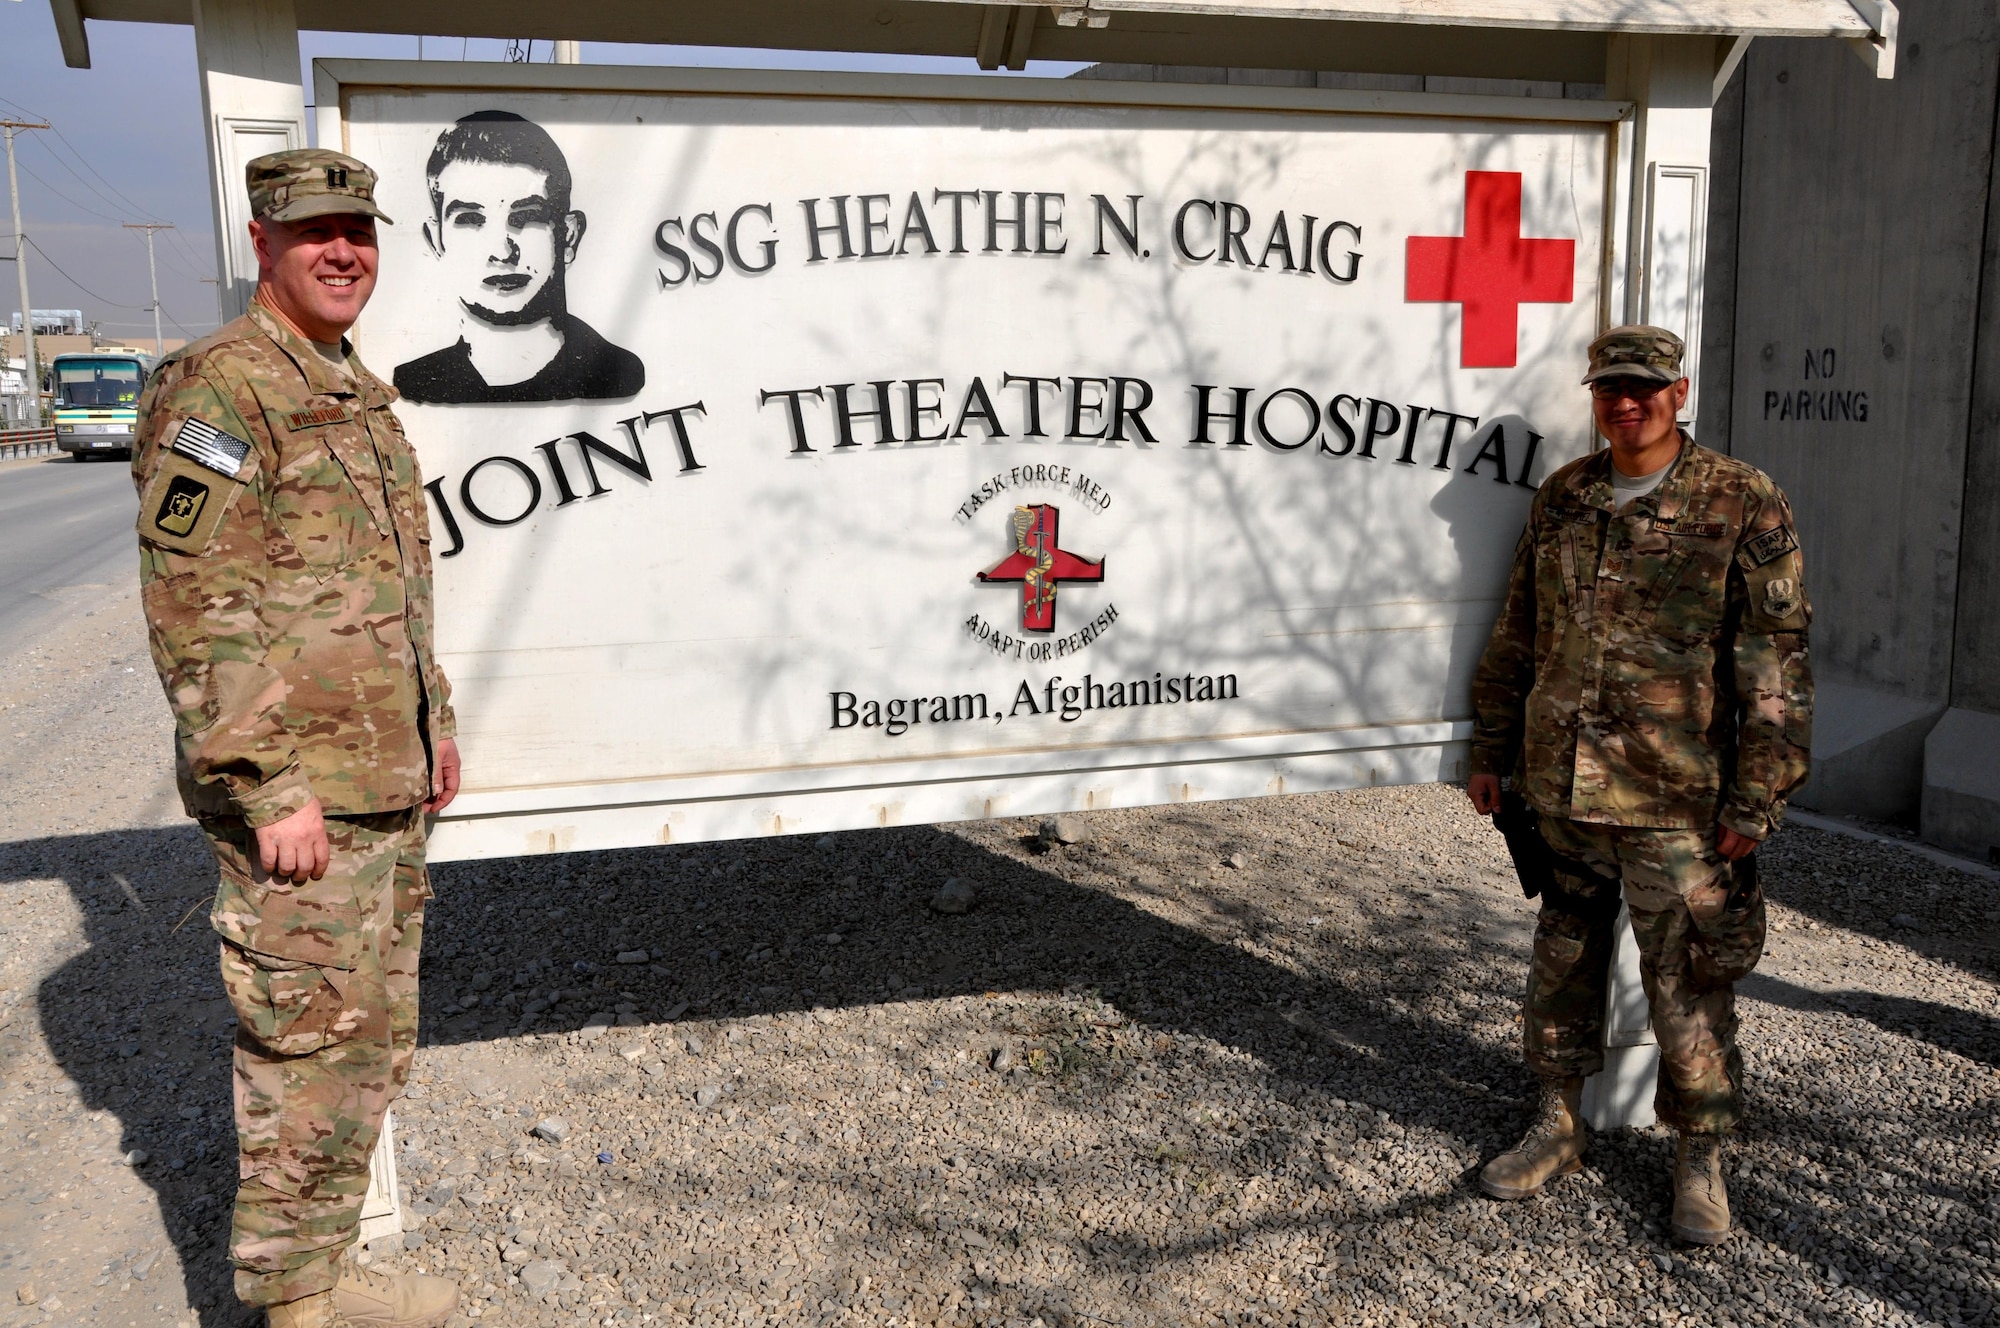 Chaplain (Capt.) Gary Willeford and Chaplain Assistant Tech. Sgt. Brian Ramirez pose for a photograph in front of Craig Joint Theater Hospital, Bagram Airfield, Afghanistan. Willeford and Ramirez are one of two religious support teams providing religious support and counsel to patients and caregivers at Craig Joint Theater Hospital. (Courtesy photo) 